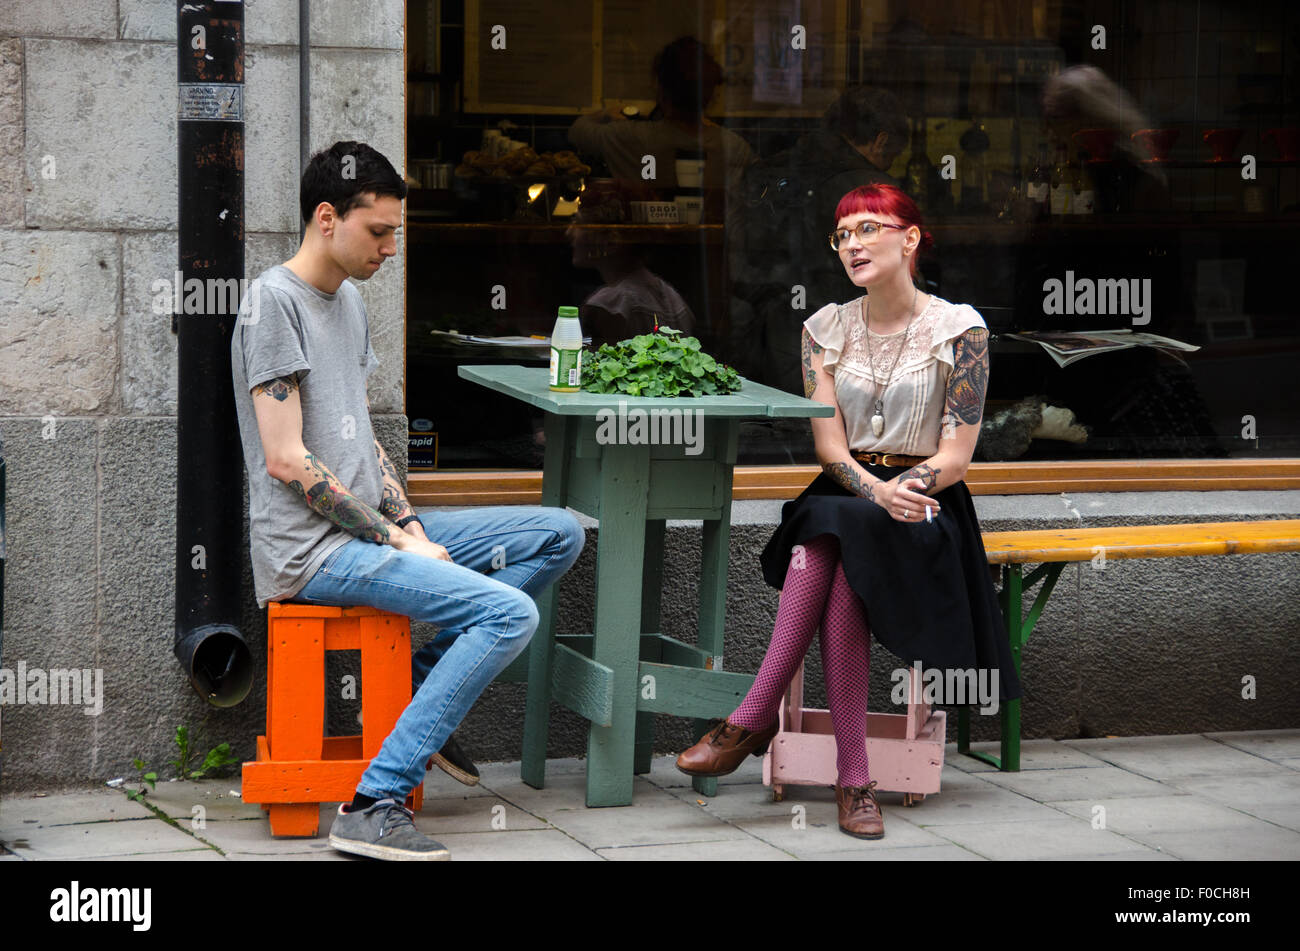 Young and modern vibe in Stockholm. Stock Photo